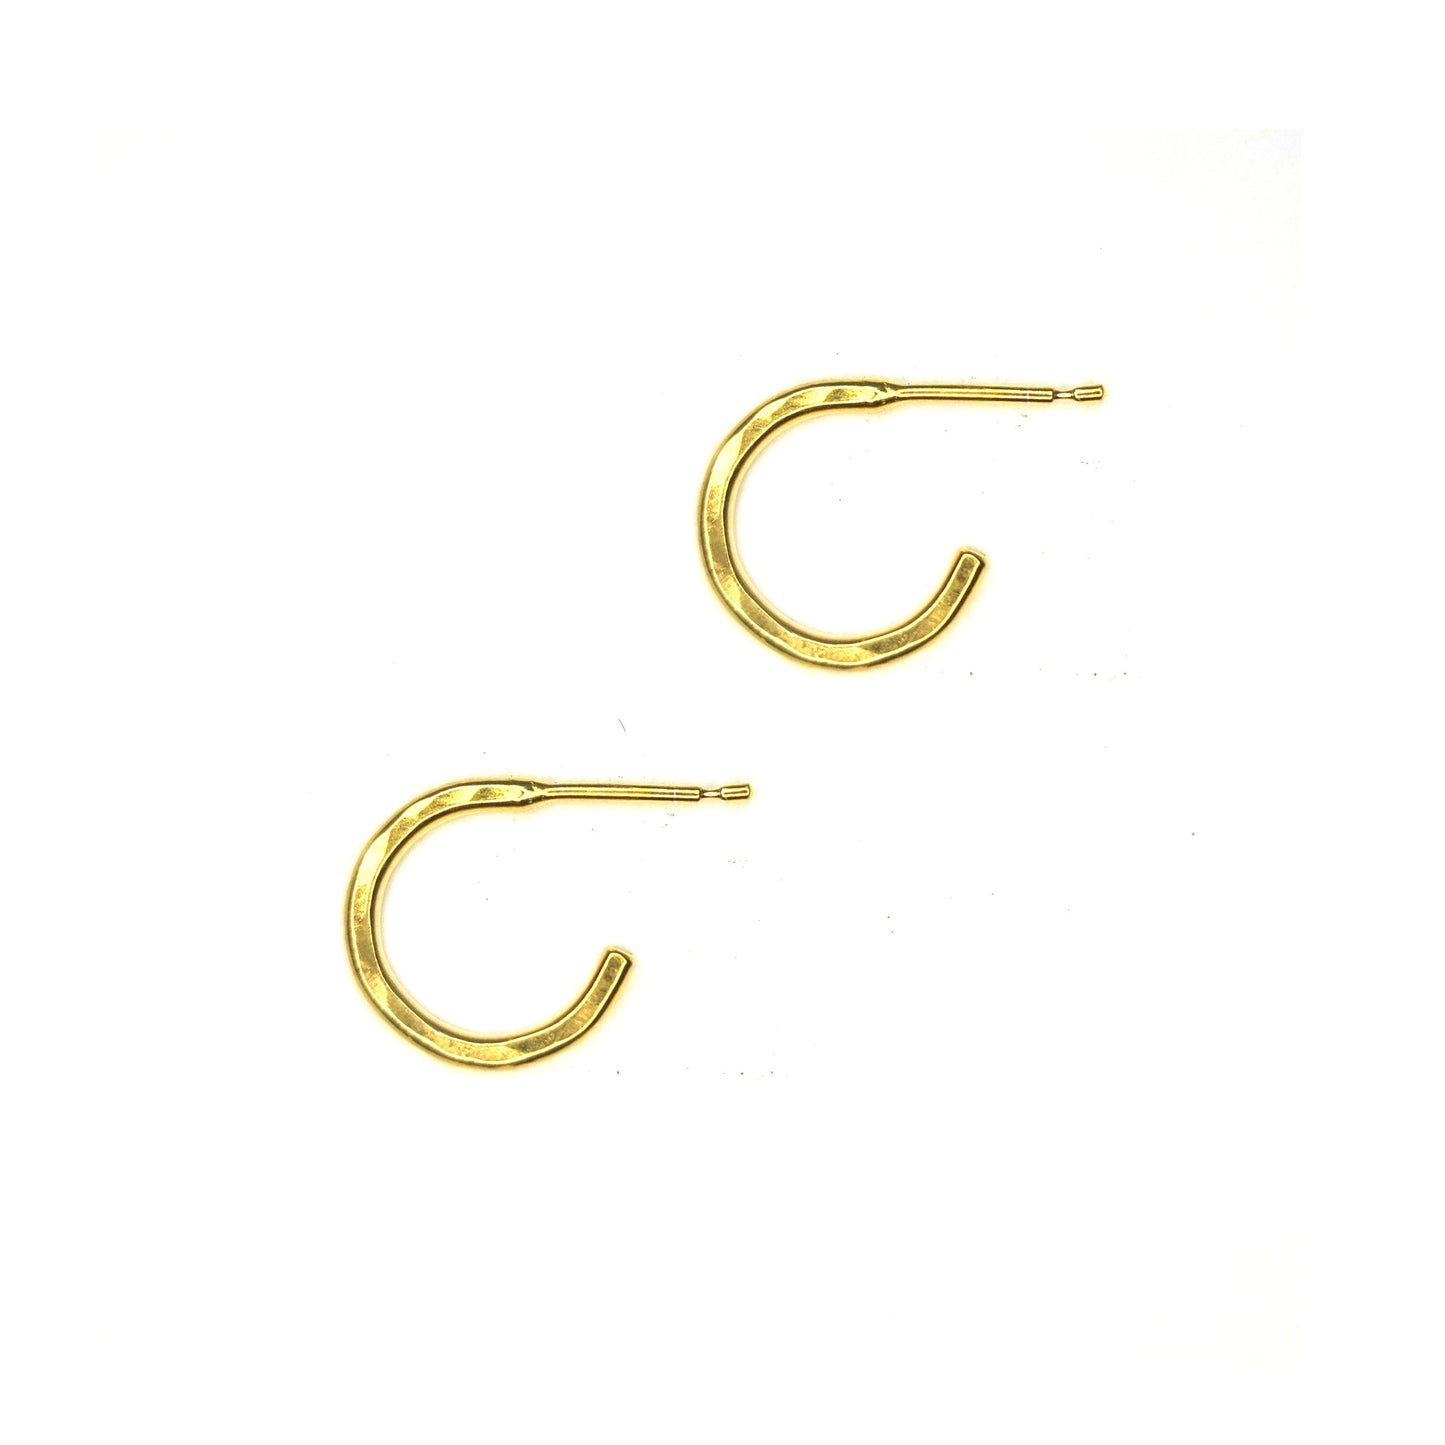 Yellow gold vermeil thin hammered hoop earrings, small.